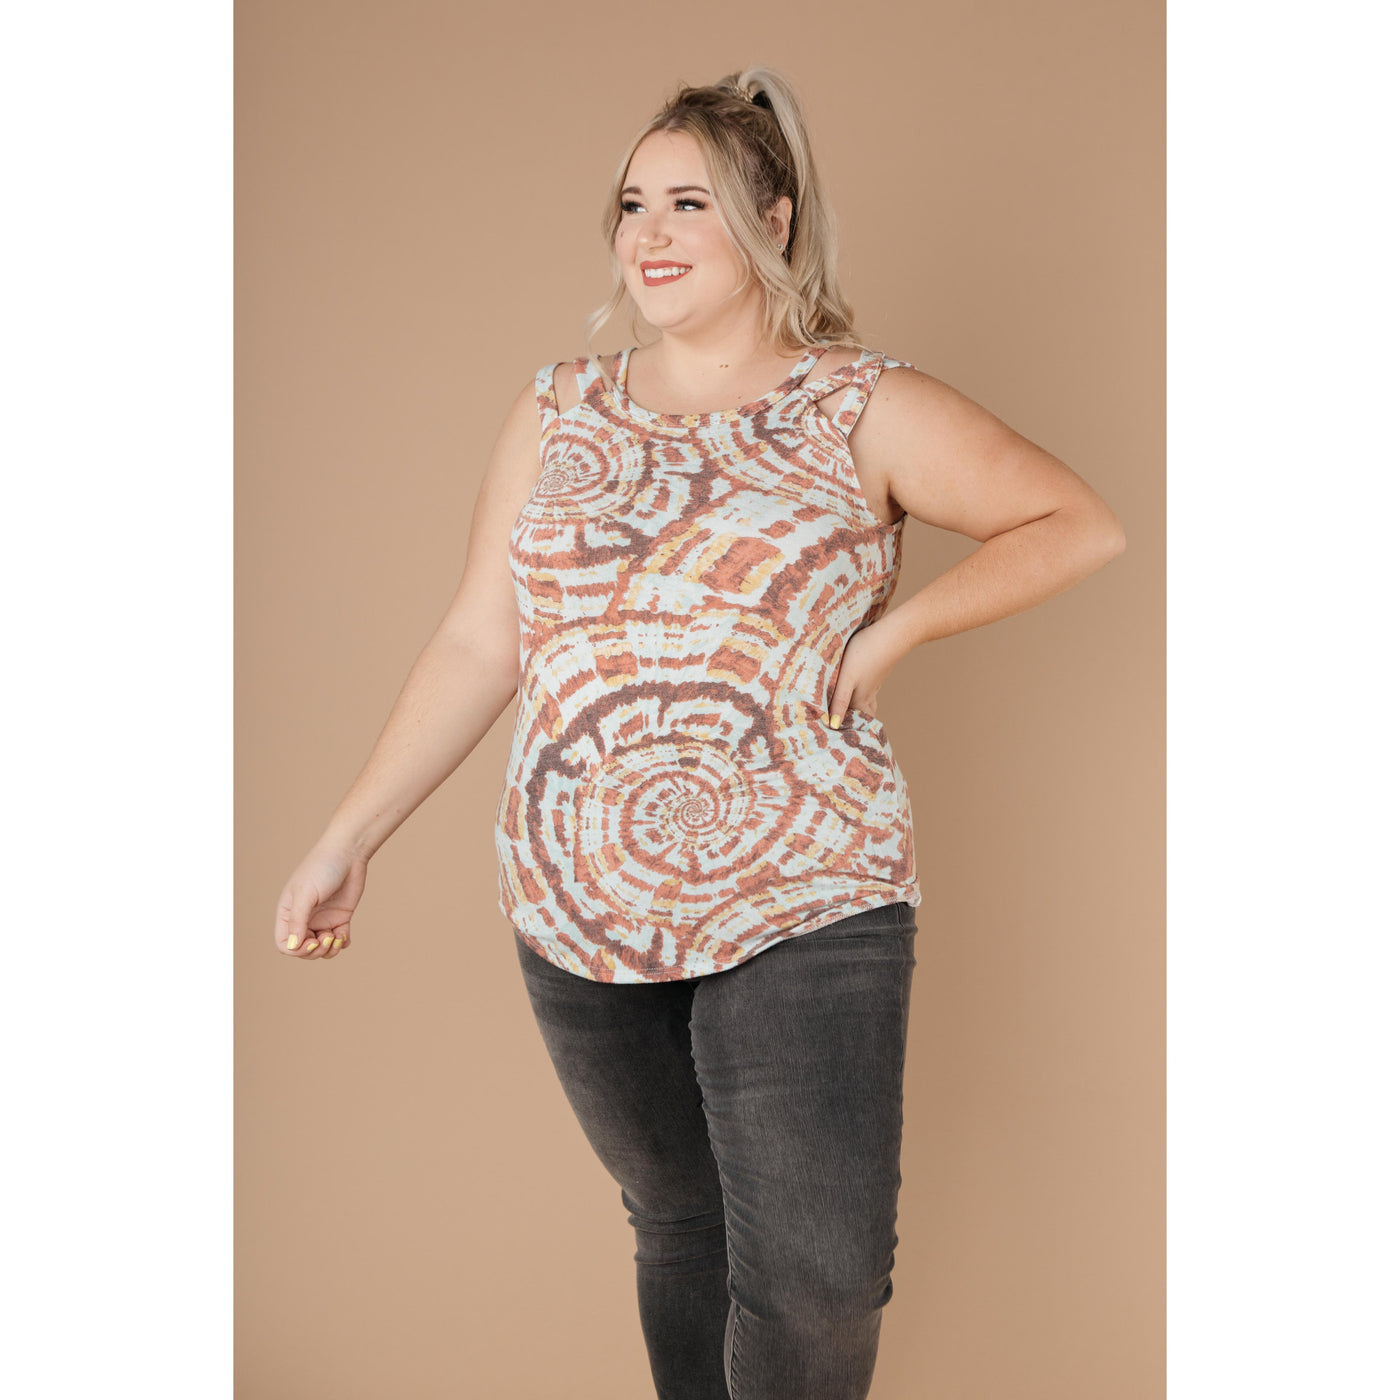 Concentric Rings Top-W Top-Graceful & Chic Boutique, Family Clothing Store in Waxahachie, Texas